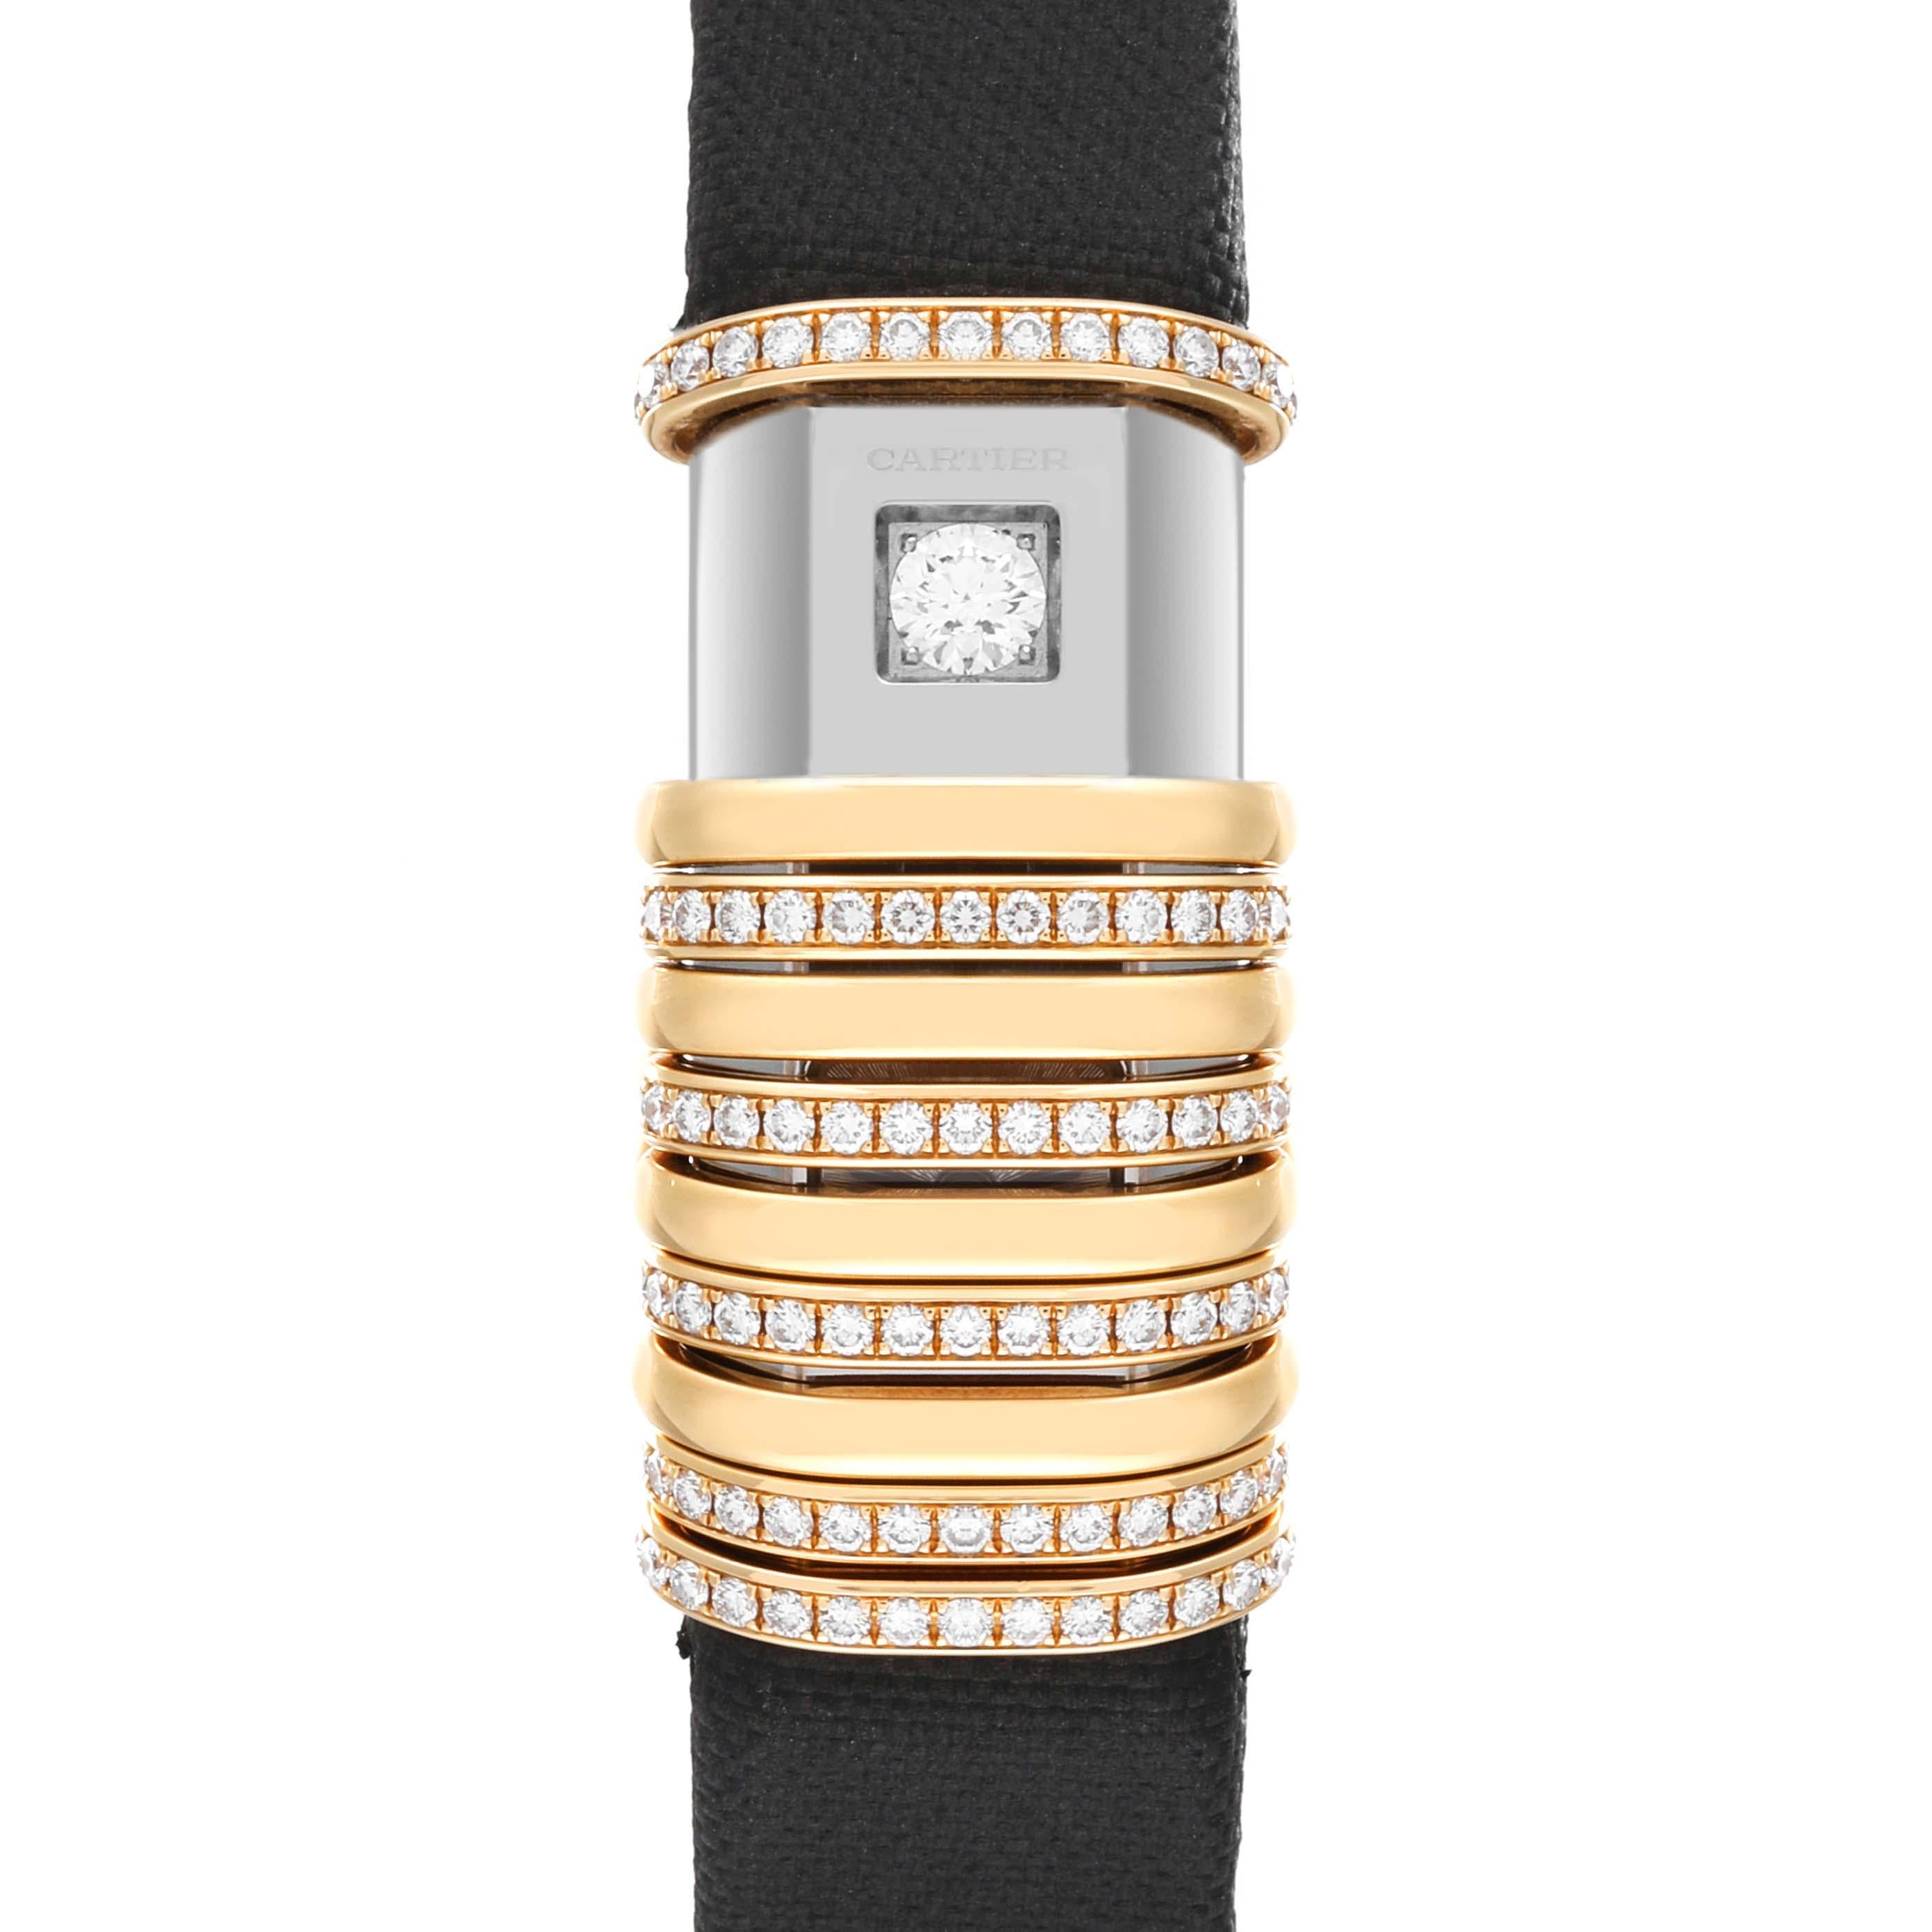 Cartier Declaration Yellow Gold Titanium Diamond Ladies Watch WT000150. Quartz movement. Elongated curved titanium case 18 mm x 39 mm. Ten 18k yellow gold mobile sliding bands moving freely along its length to reveal the dial or round brilliant cut